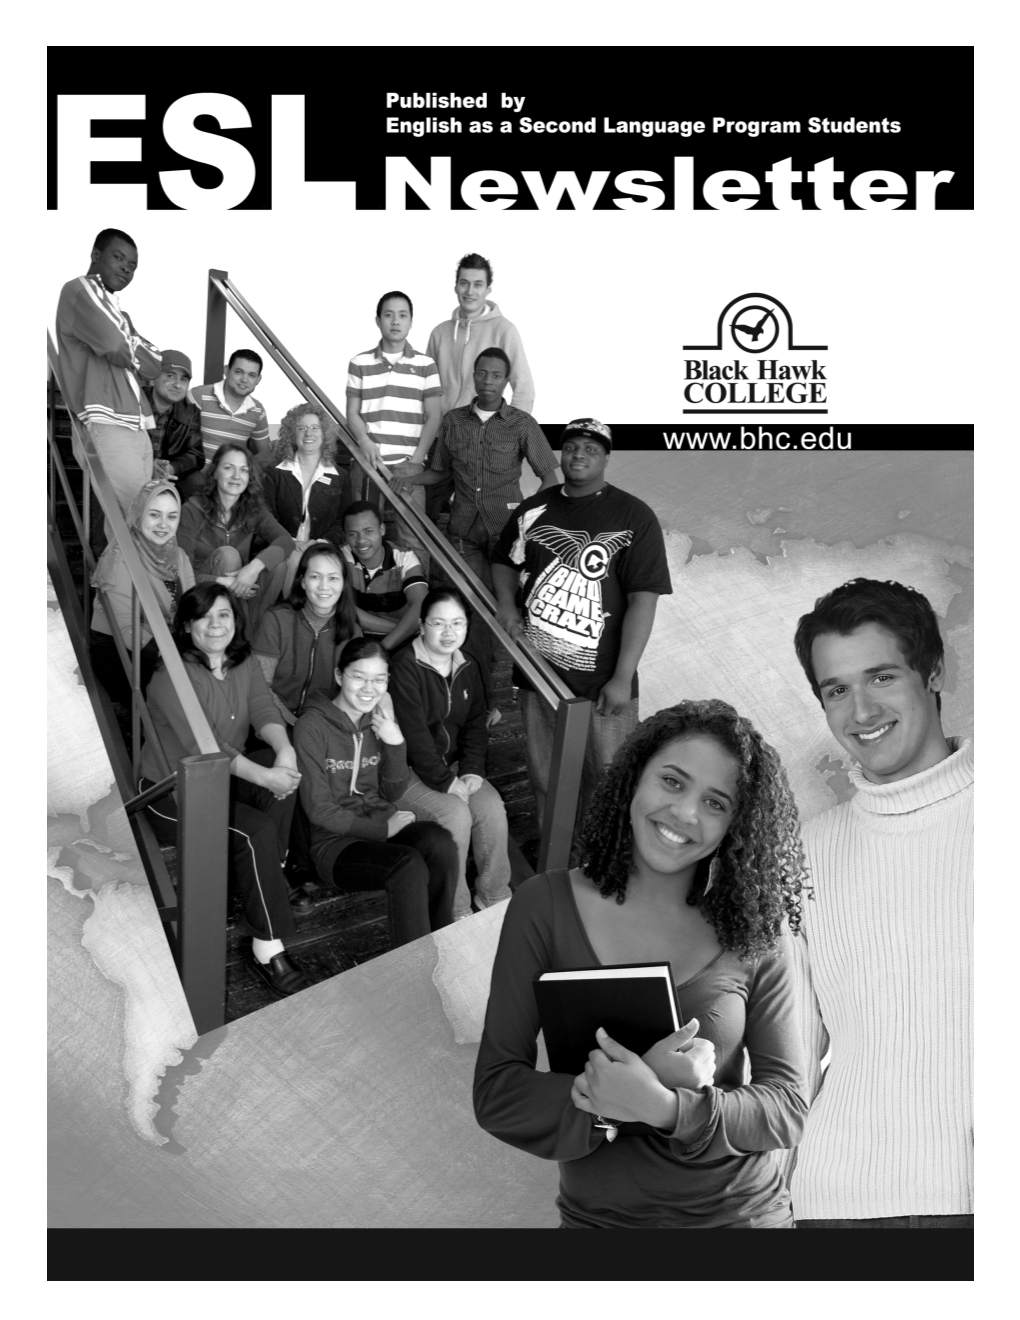 ESL NEWSLETTER a Publication from Spring Semester 2009 English As a Second Language Students